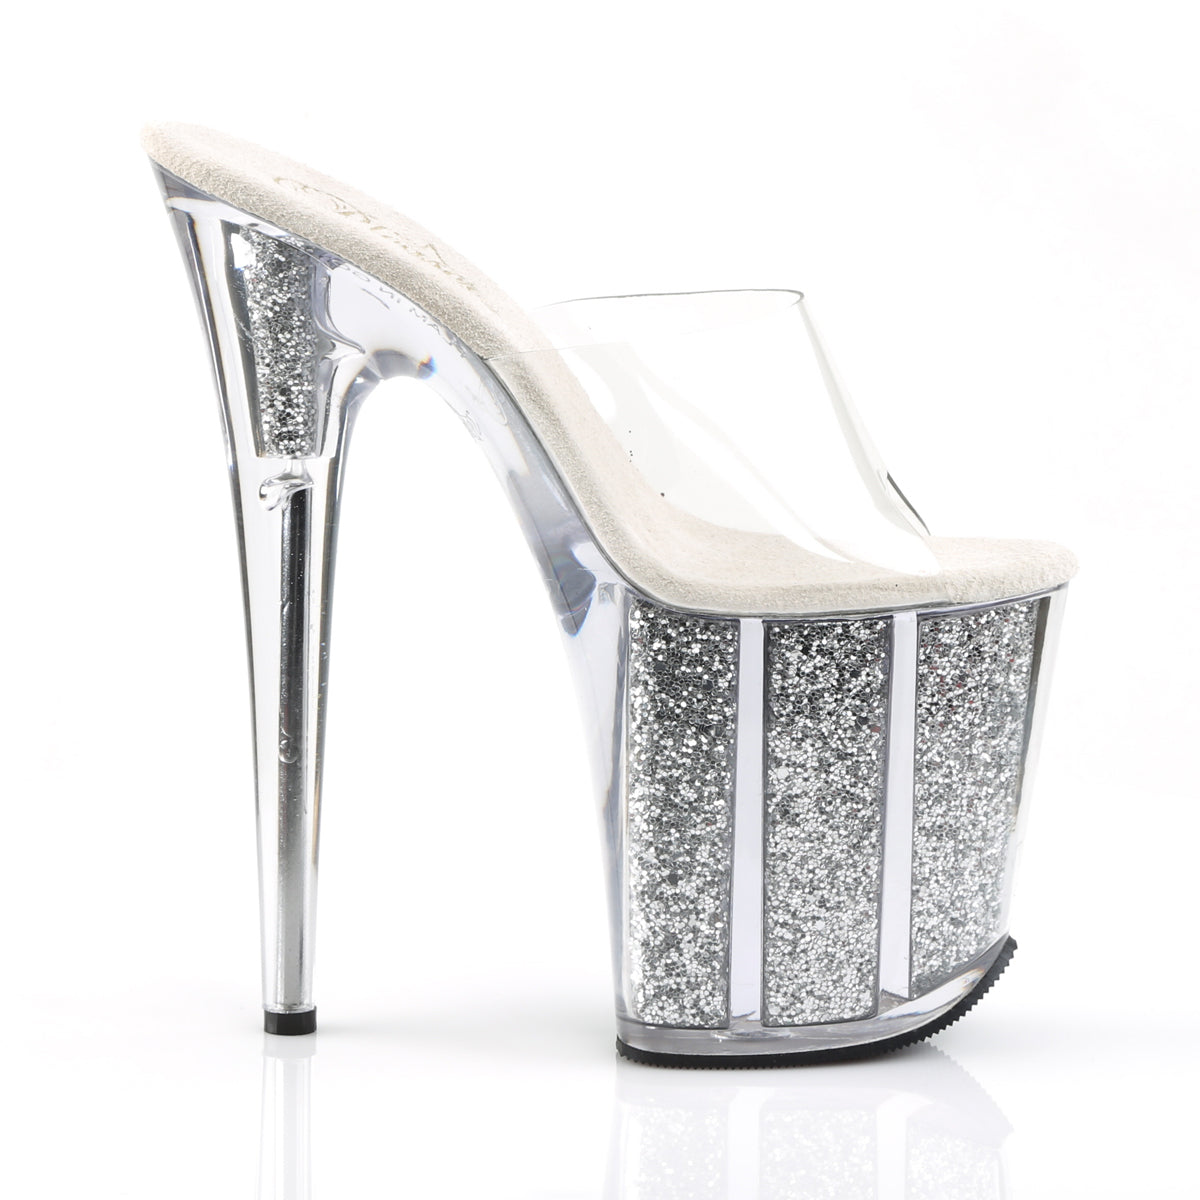 FLAMINGO-801G 8" Heel Clear Silver Glitter Strippers Shoes-Pleaser- Sexy Shoes Fetish Heels